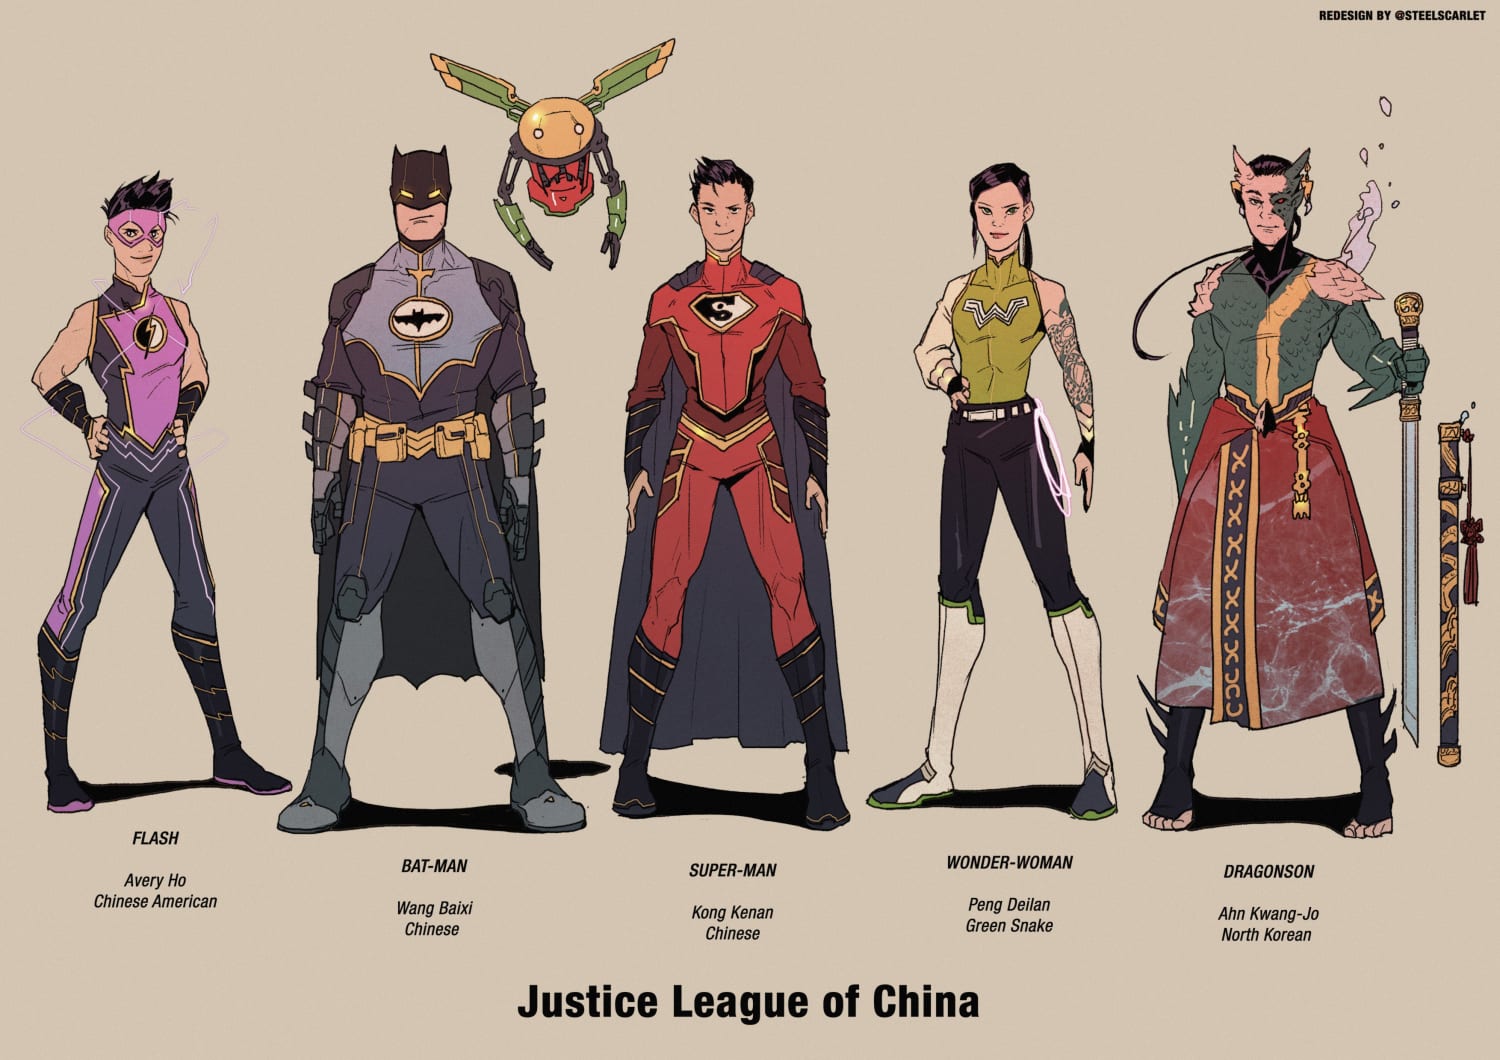 [Fan Art] Justice League of China redesigns by @SteelScarlet